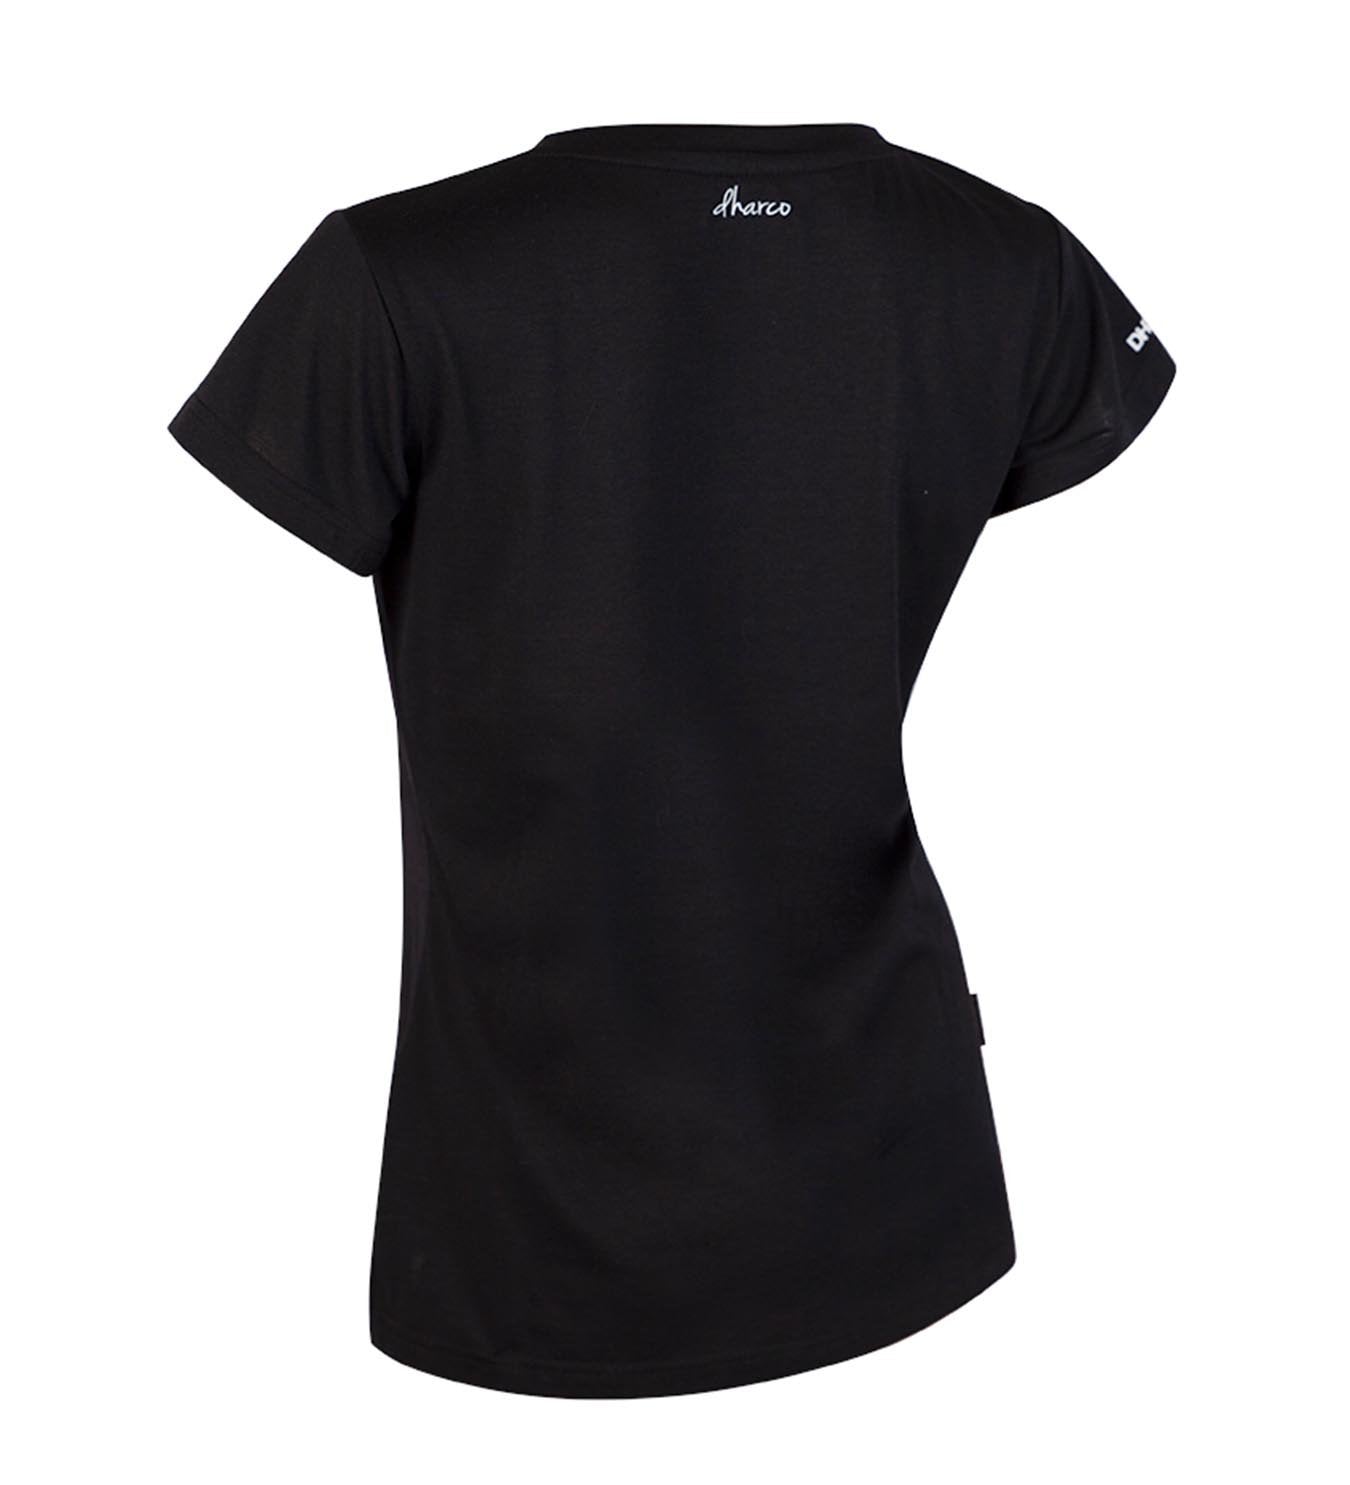 DHaRCO Ladies Tech Tee - Black Forest